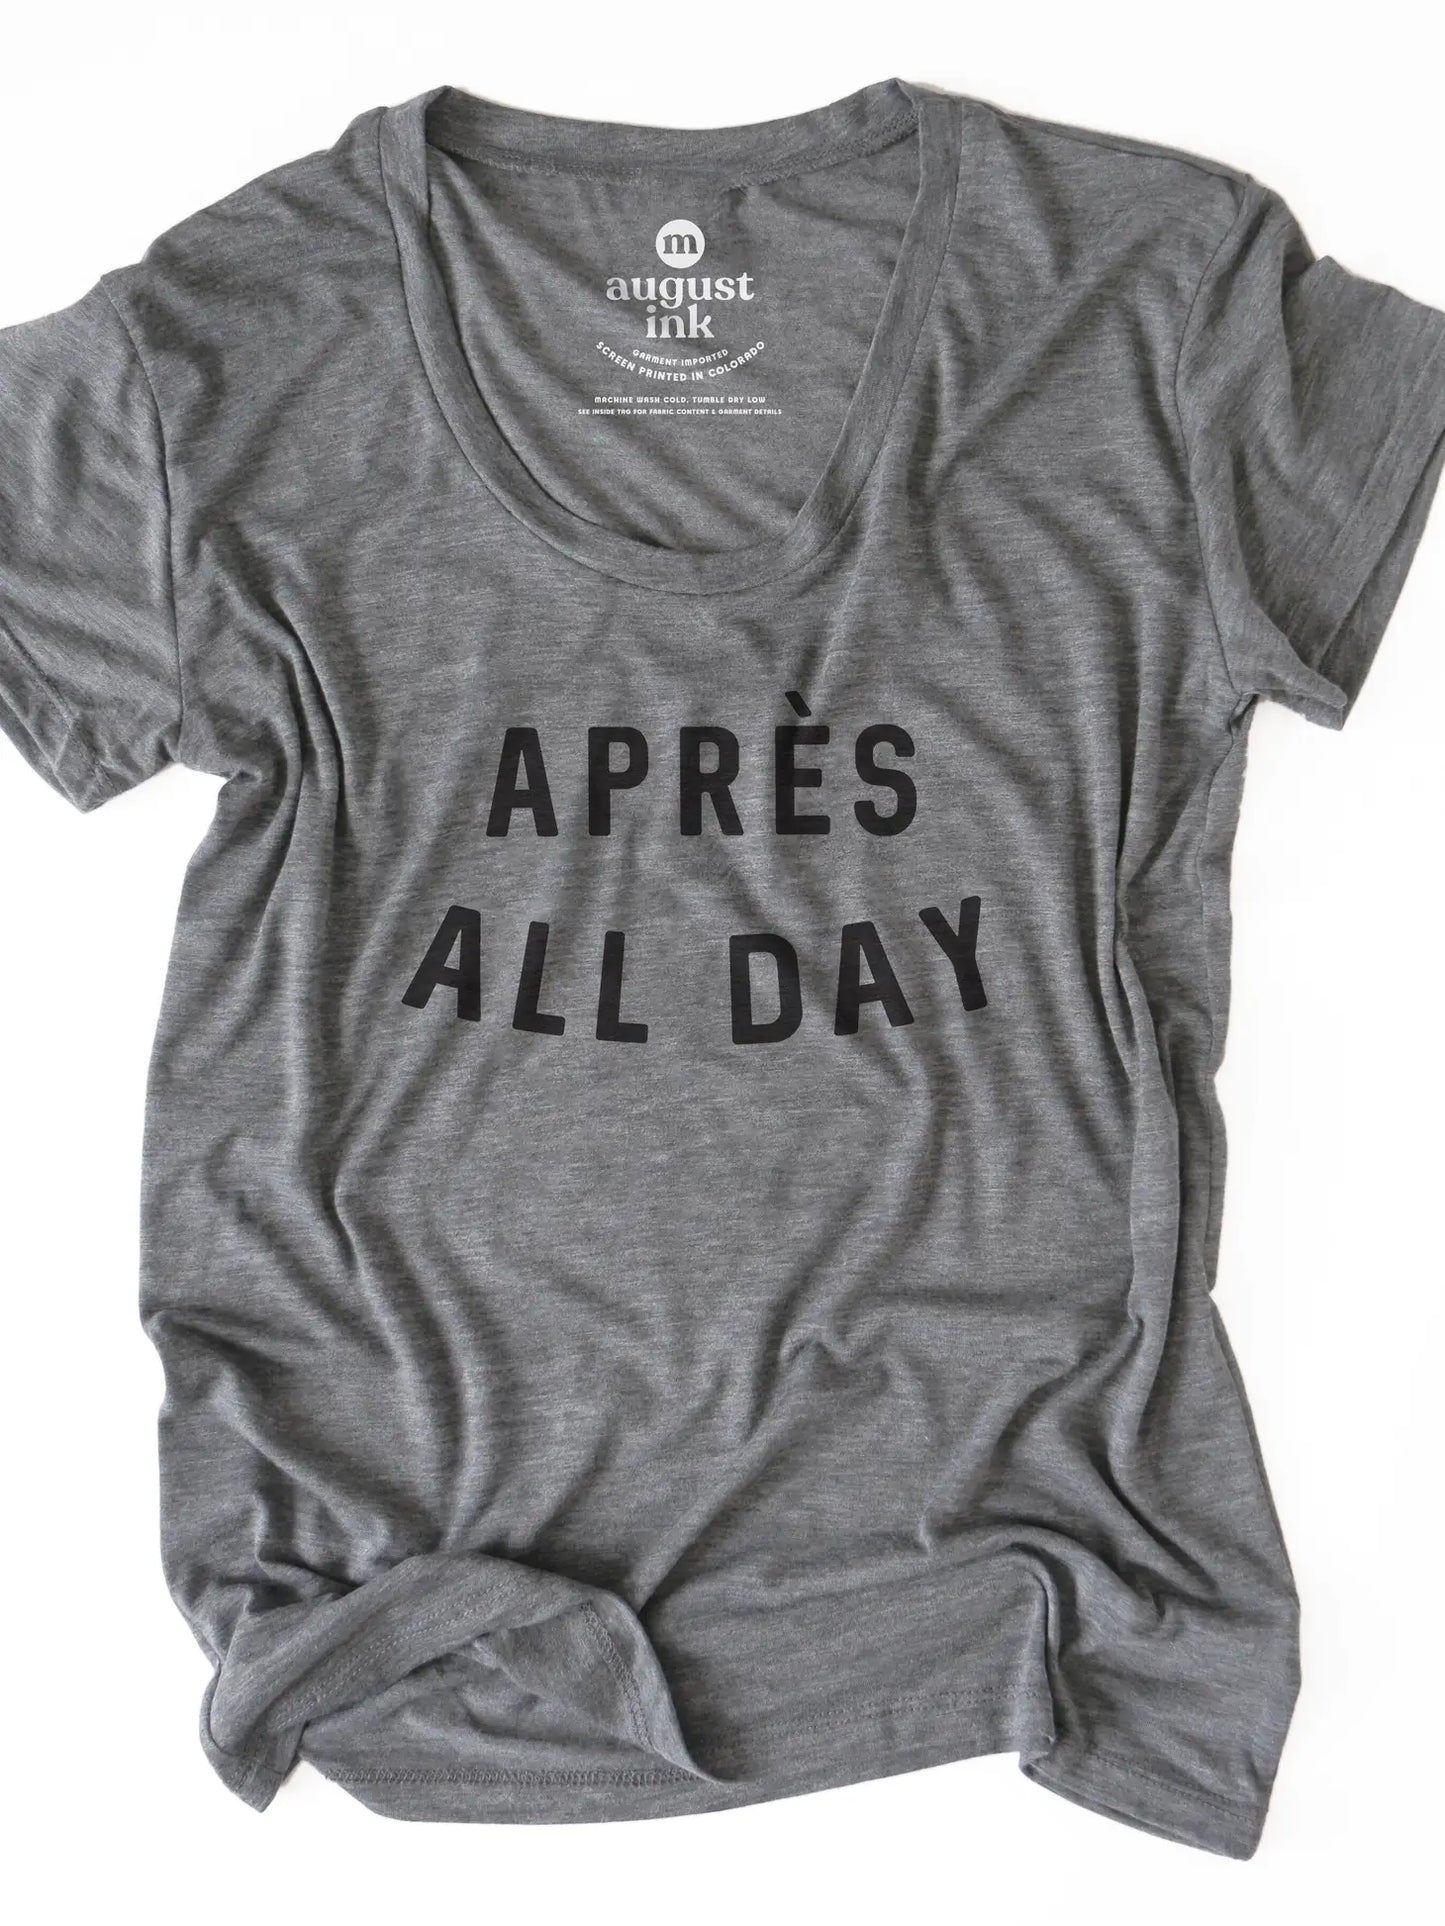 Apres All Day Tee